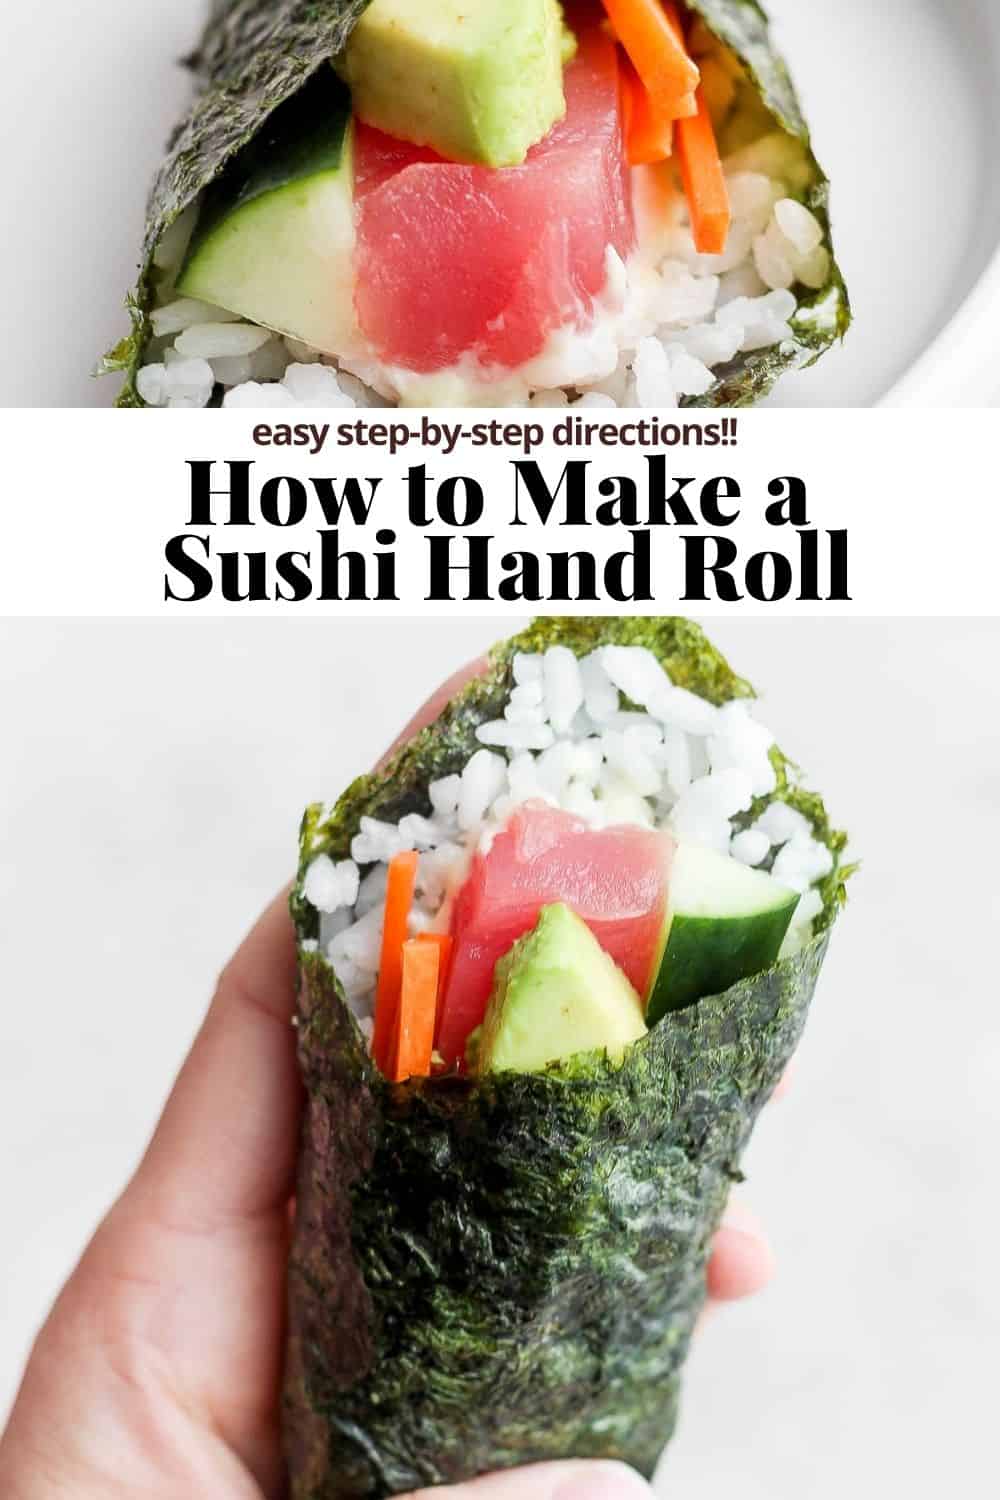 Pinterest image for a sushi hand roll.